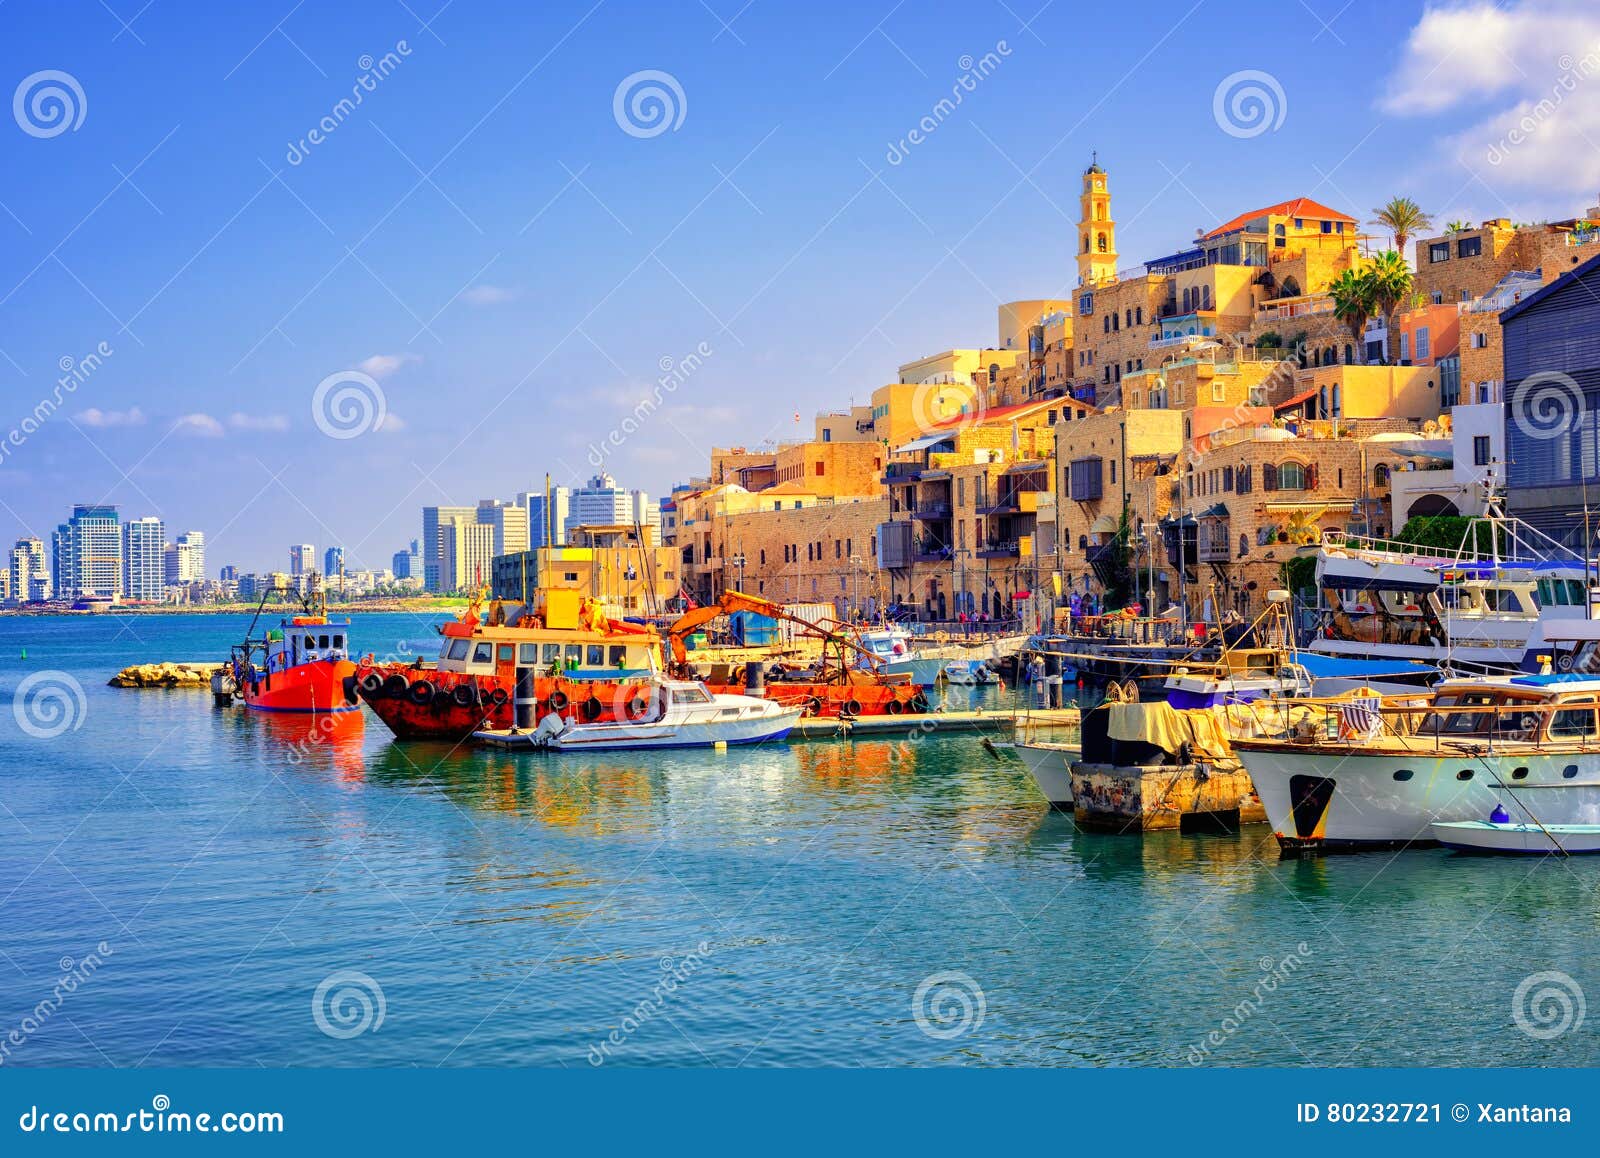 old town and port of jaffa, tel aviv city, israel